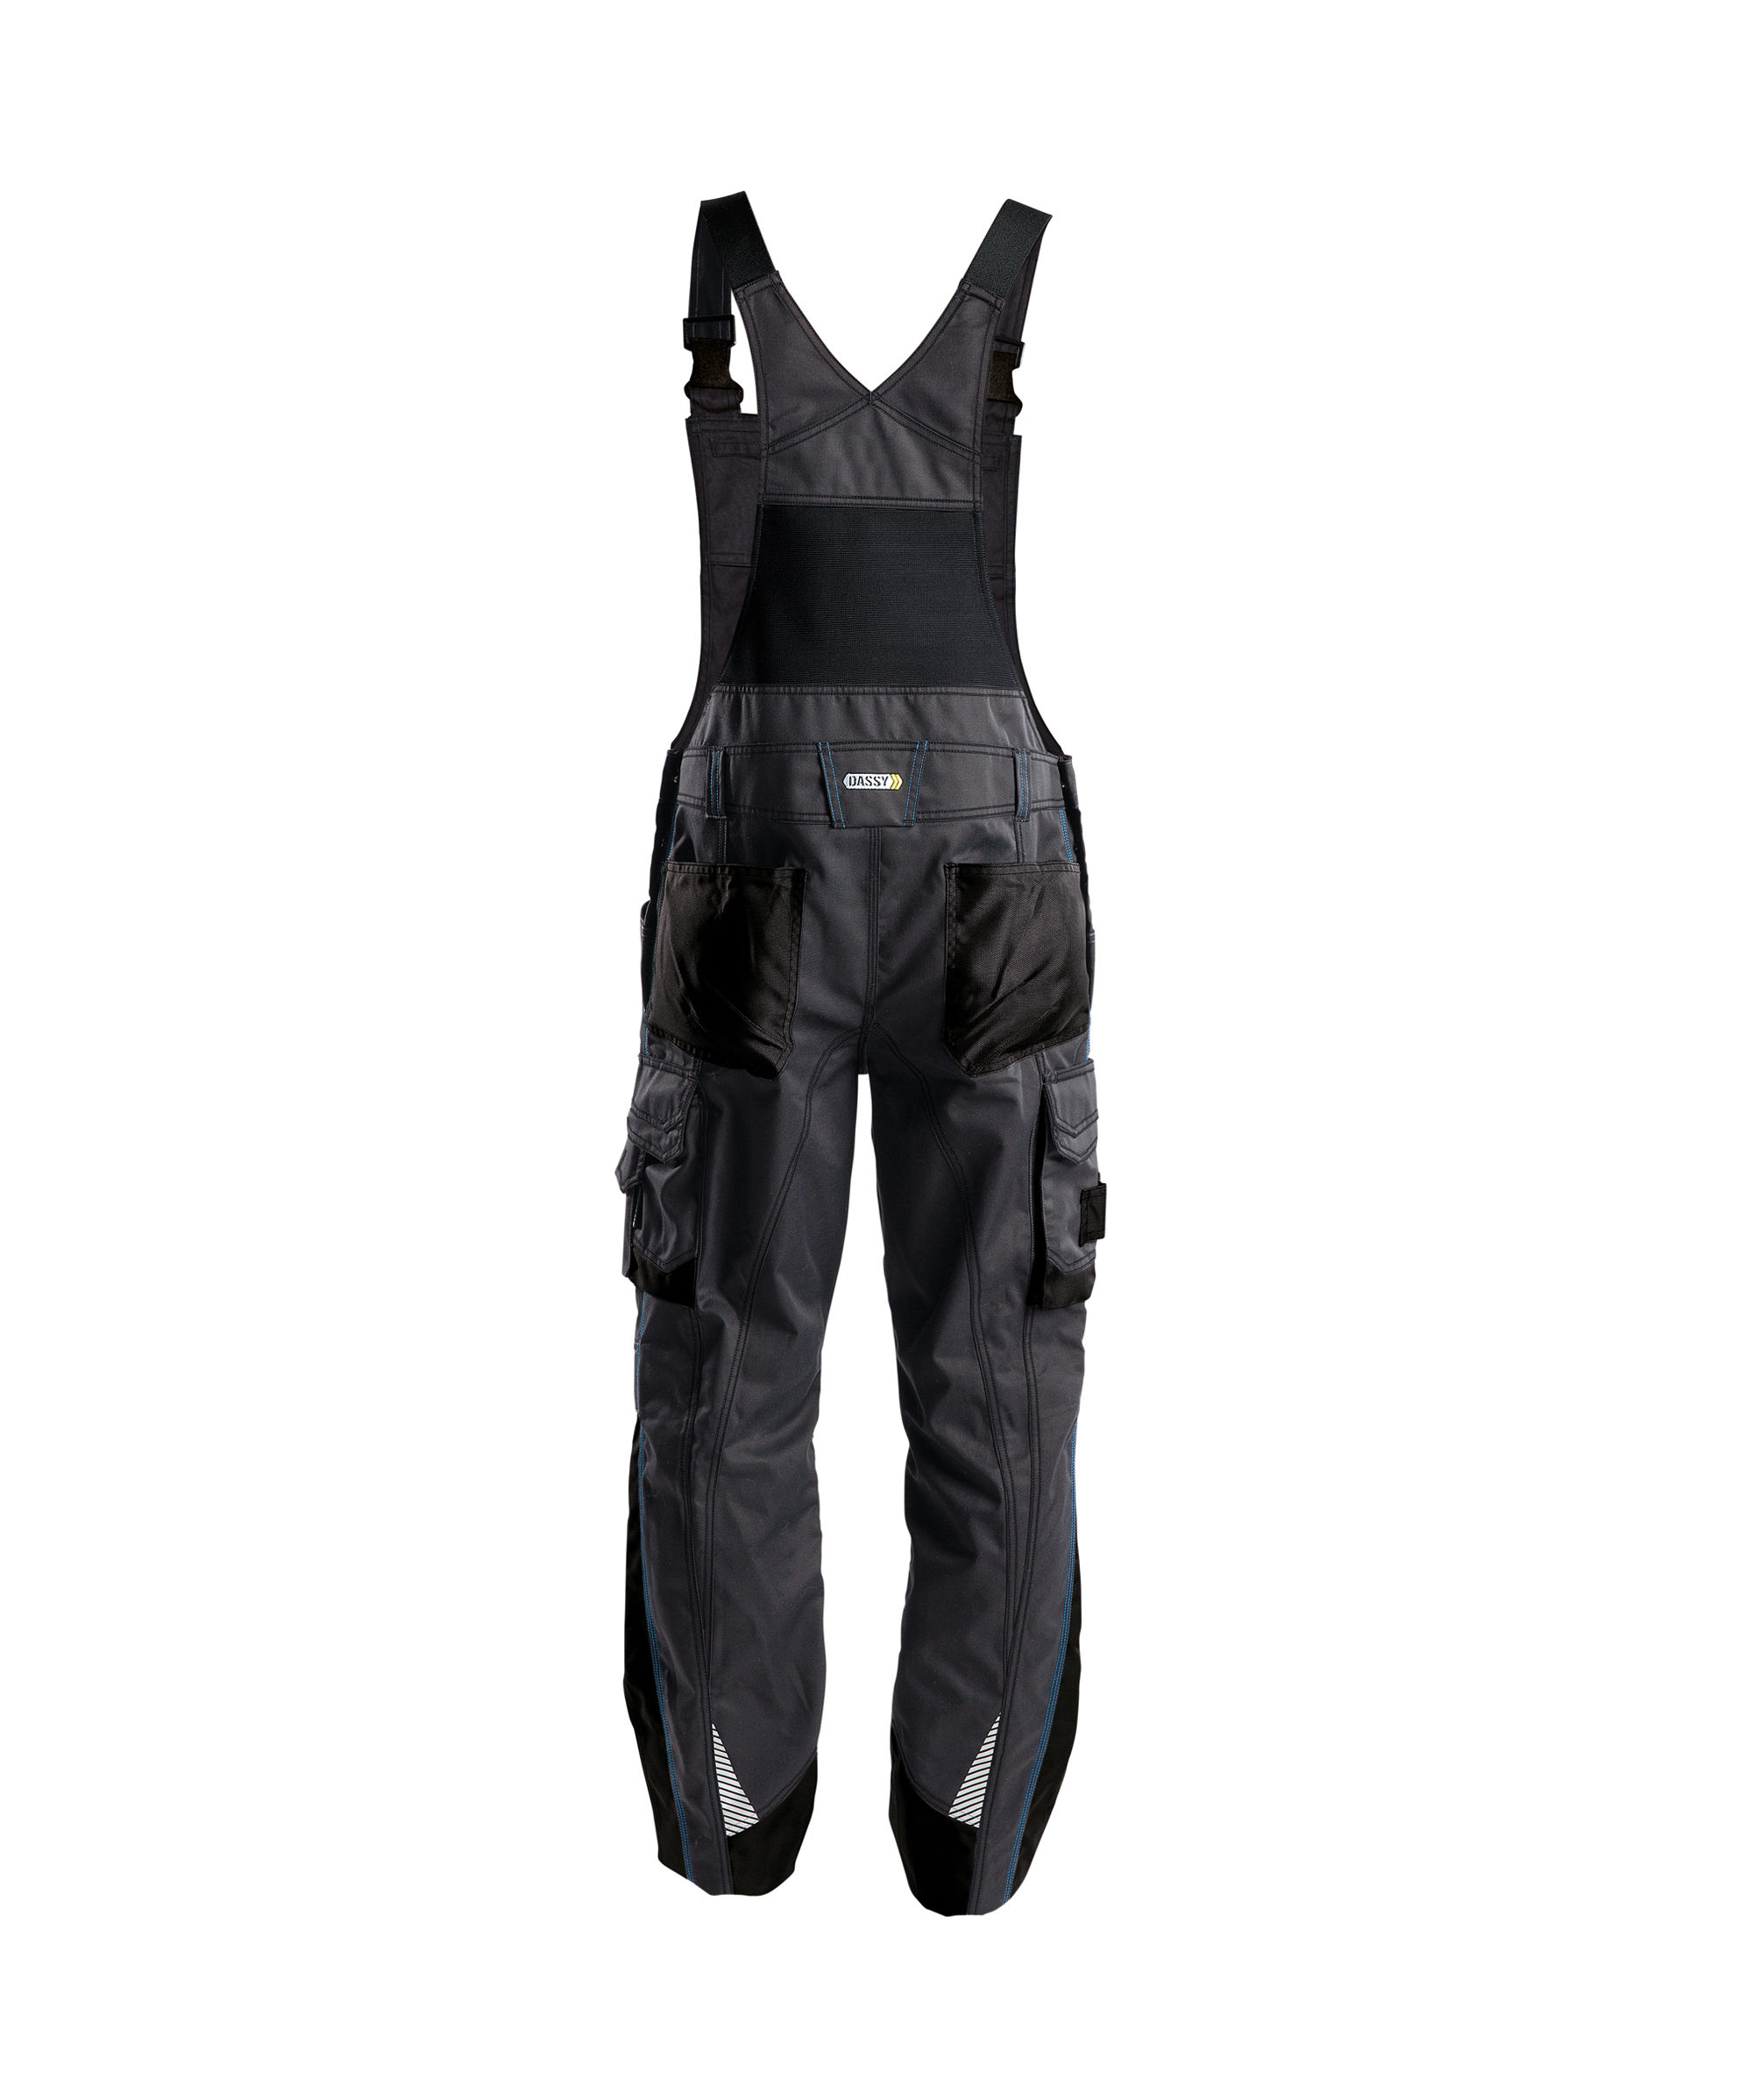 voltic_two-tone-brace-overall-with-knee-pockets_anthracite-grey-black_back.jpg